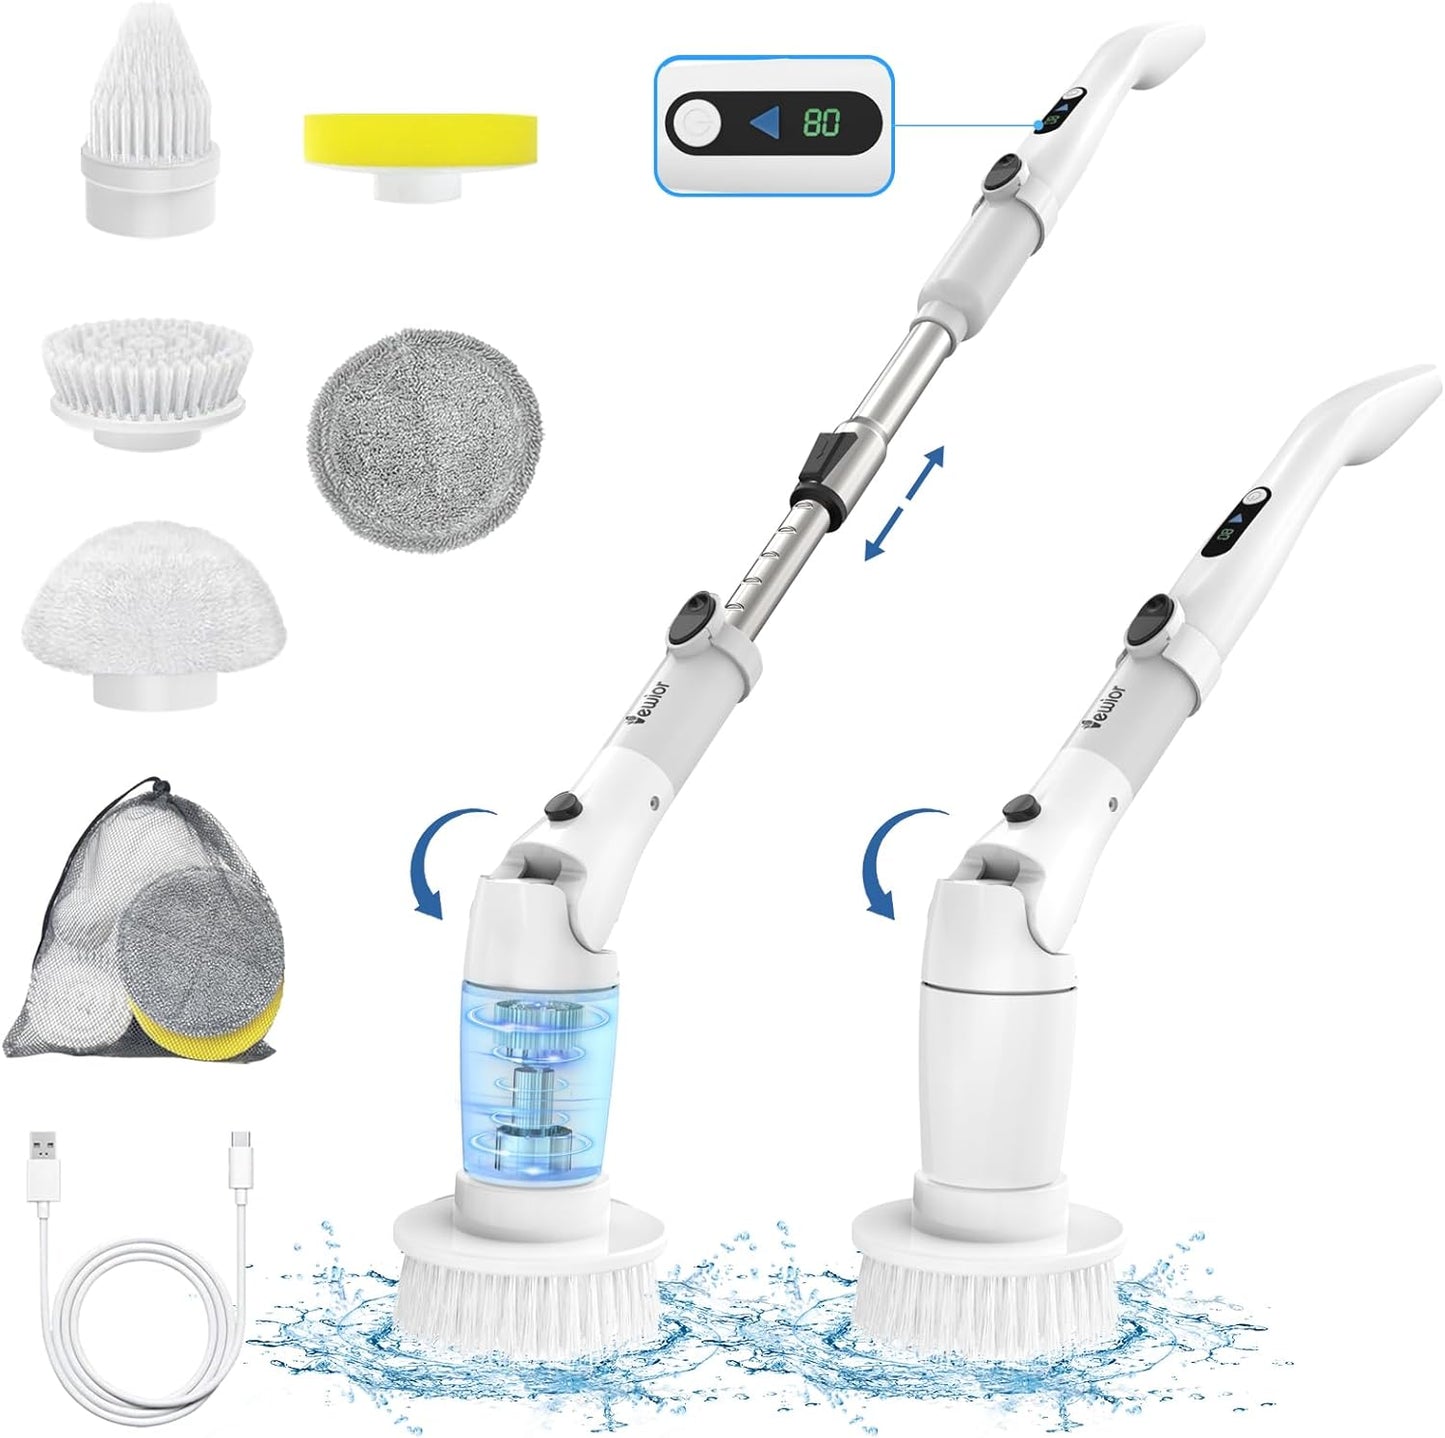 Cordless Cleaning Brush  with Display and 3 Adjustable Angle 2 Speeds 5 Replaceable Brush Heads, Power Shower Scrubber with Extension Handle for Floor Bathroom Tile Grout